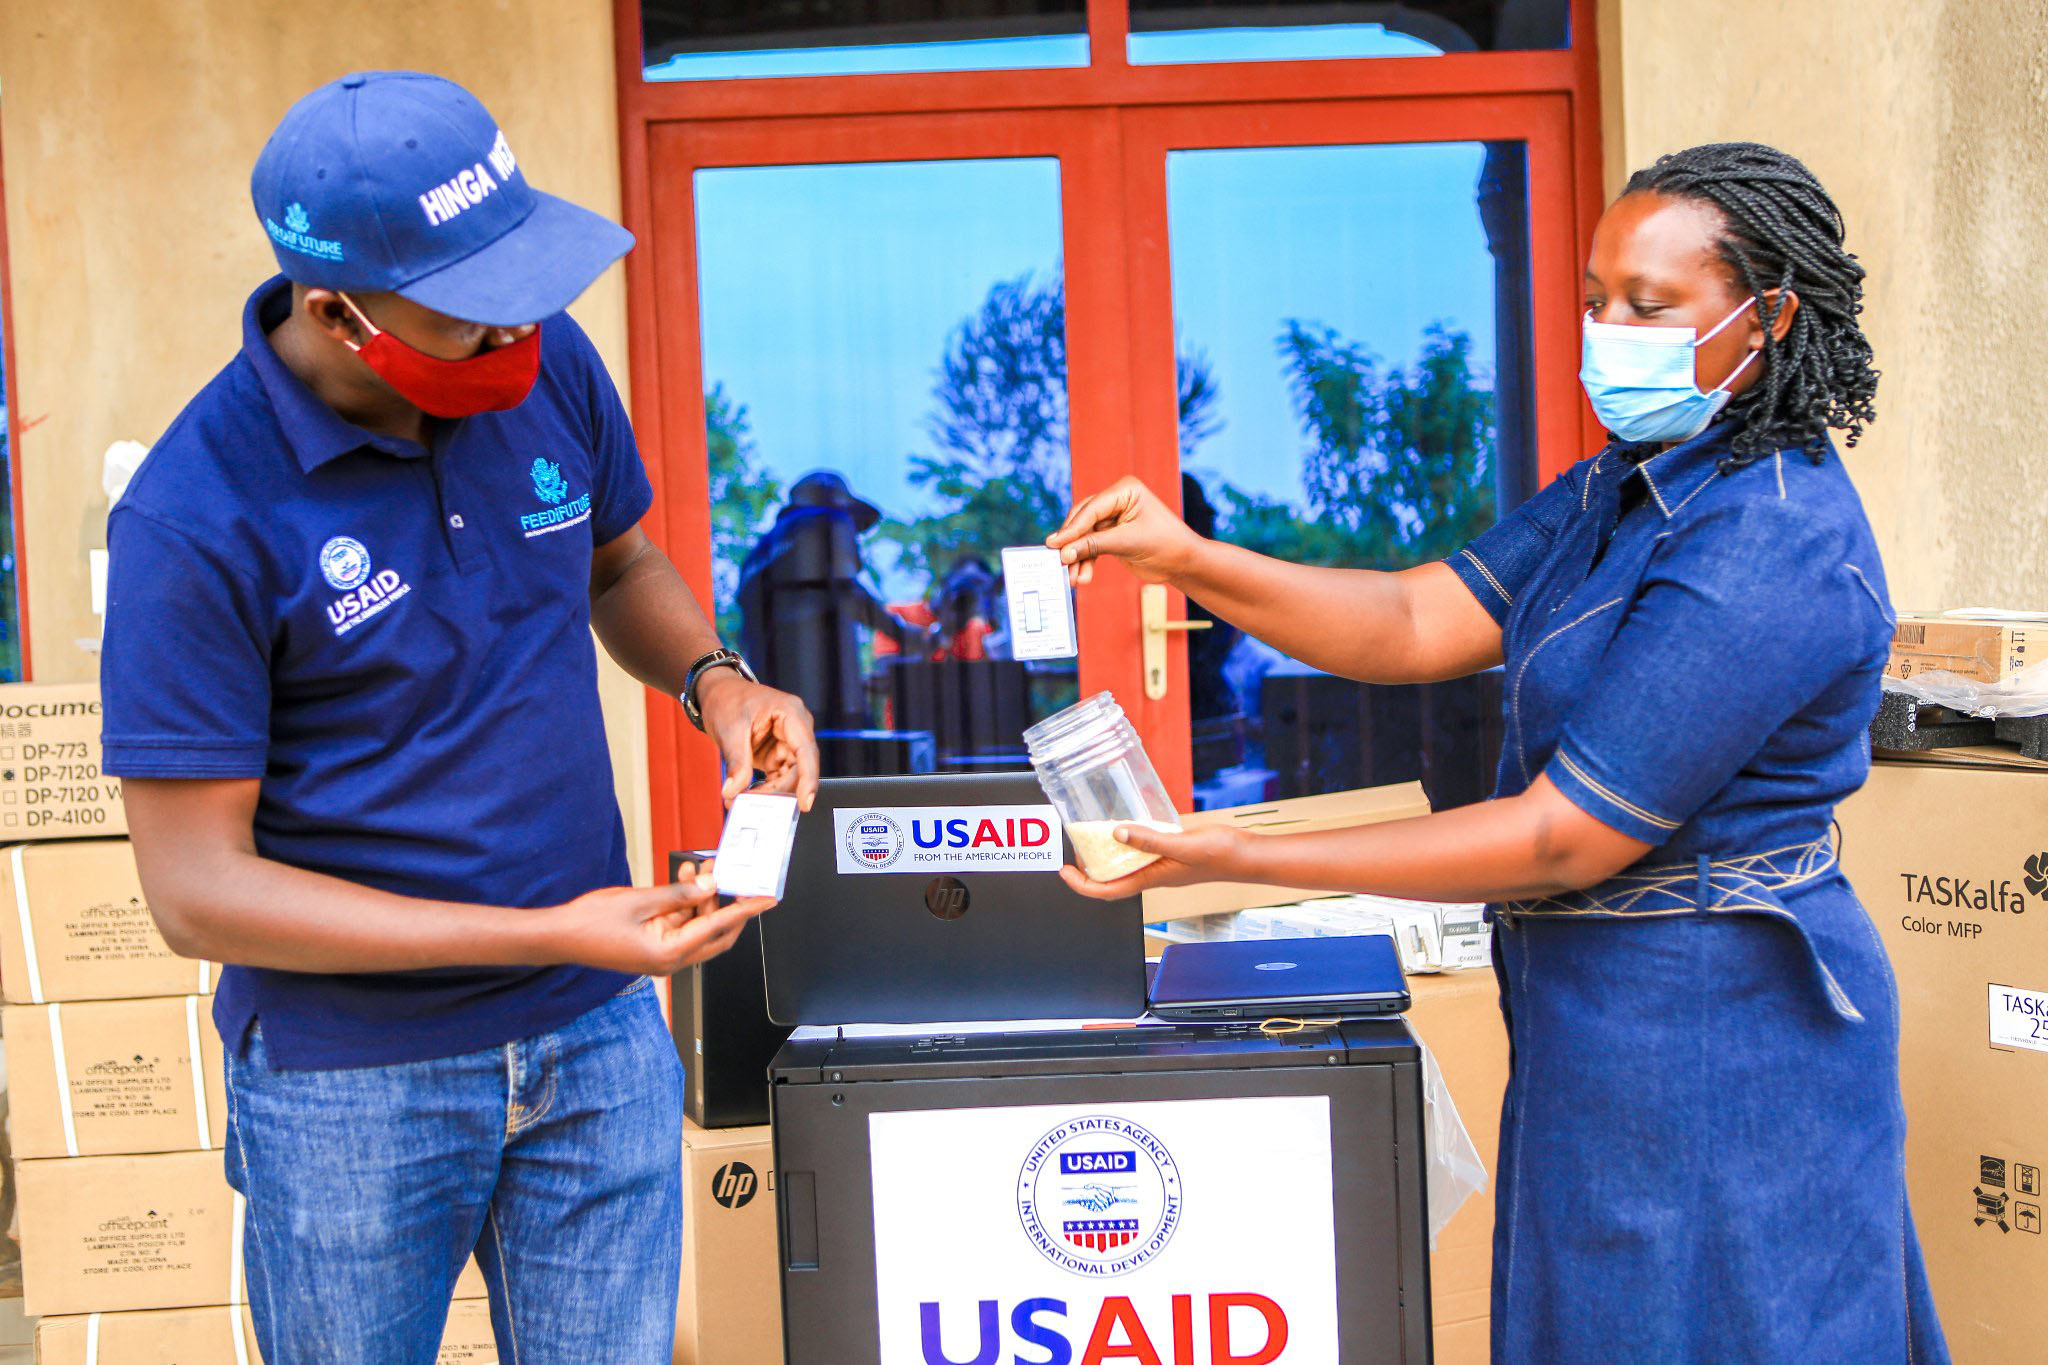 USAID-Hingaweze project staff showcase drycard devices that will be distributed across the country. Farmers are being trained to use the drycards to help them fight Aflatoxin so as to reduce post-harvest losses. Photo: Courtesy.